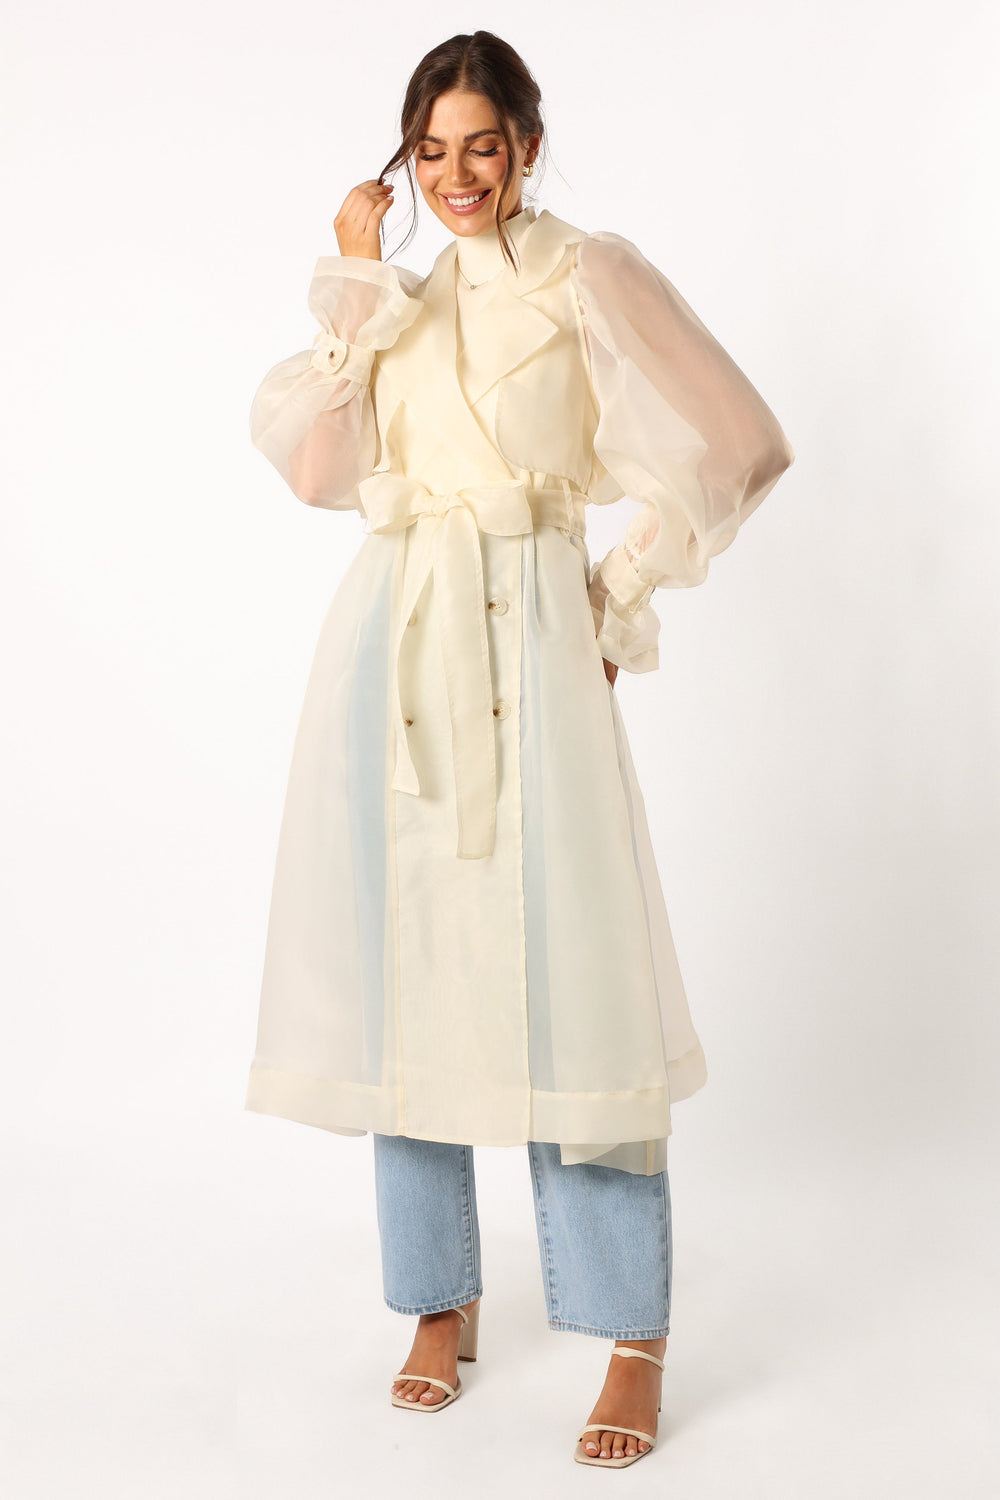 Petal and Pup USA OUTERWEAR Braelynn Sheer Trench Coat - Cream